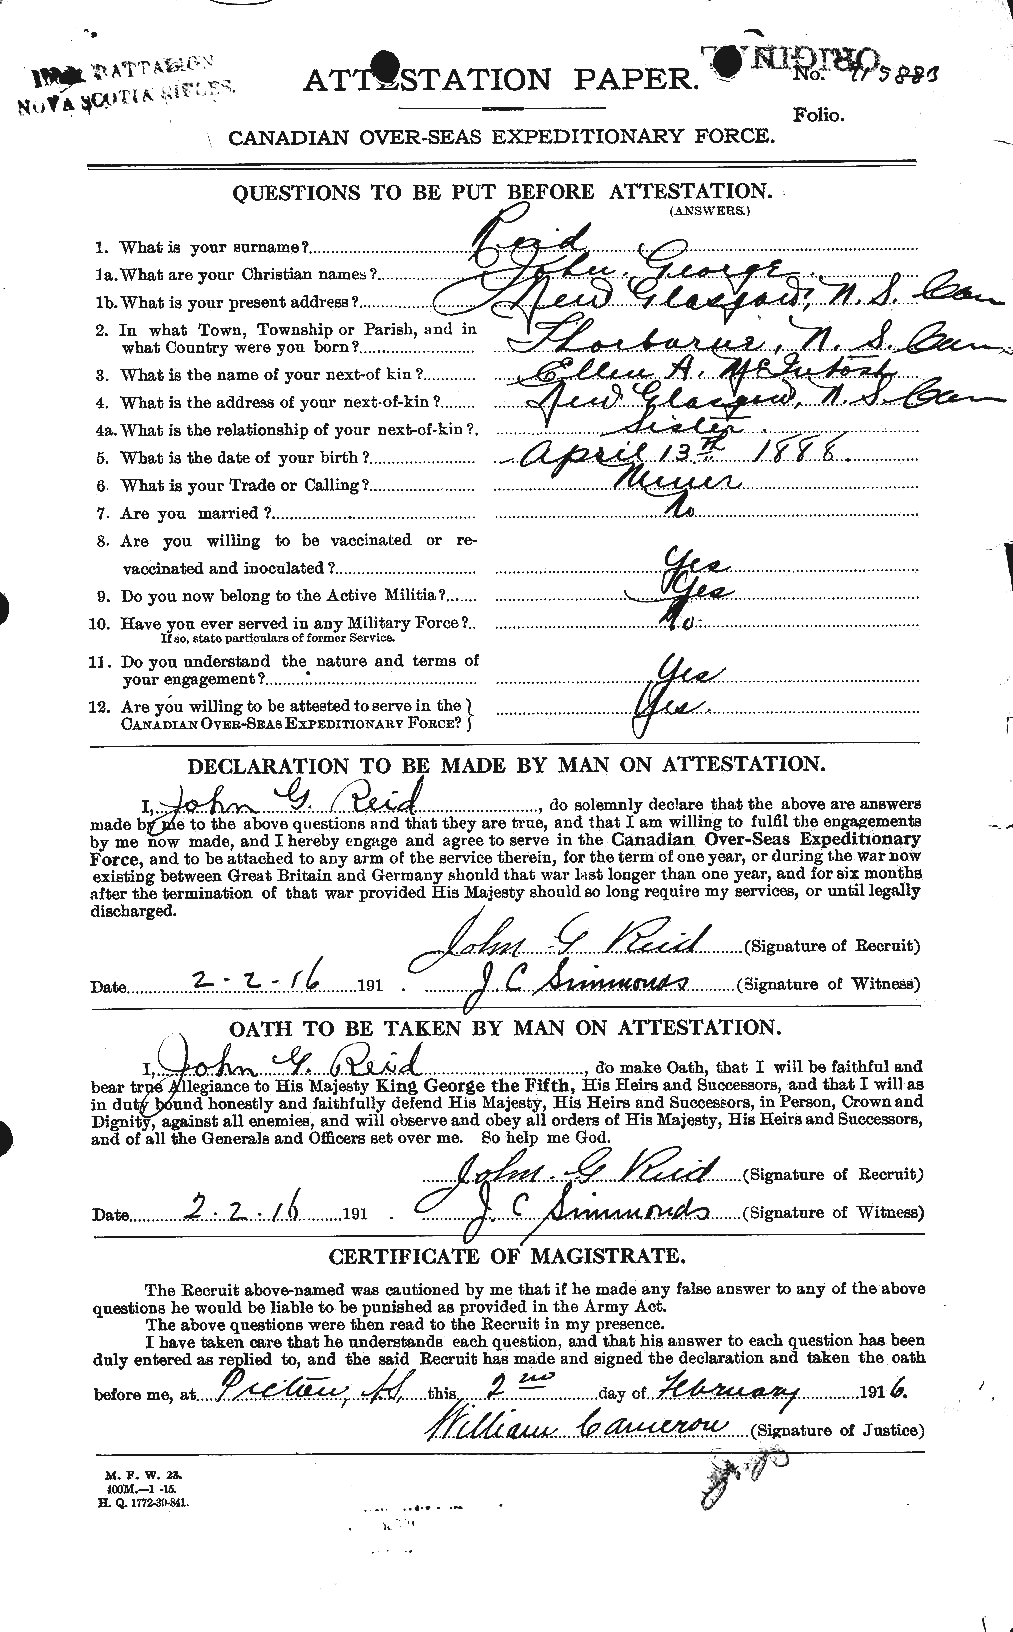 Personnel Records of the First World War - CEF 598842a